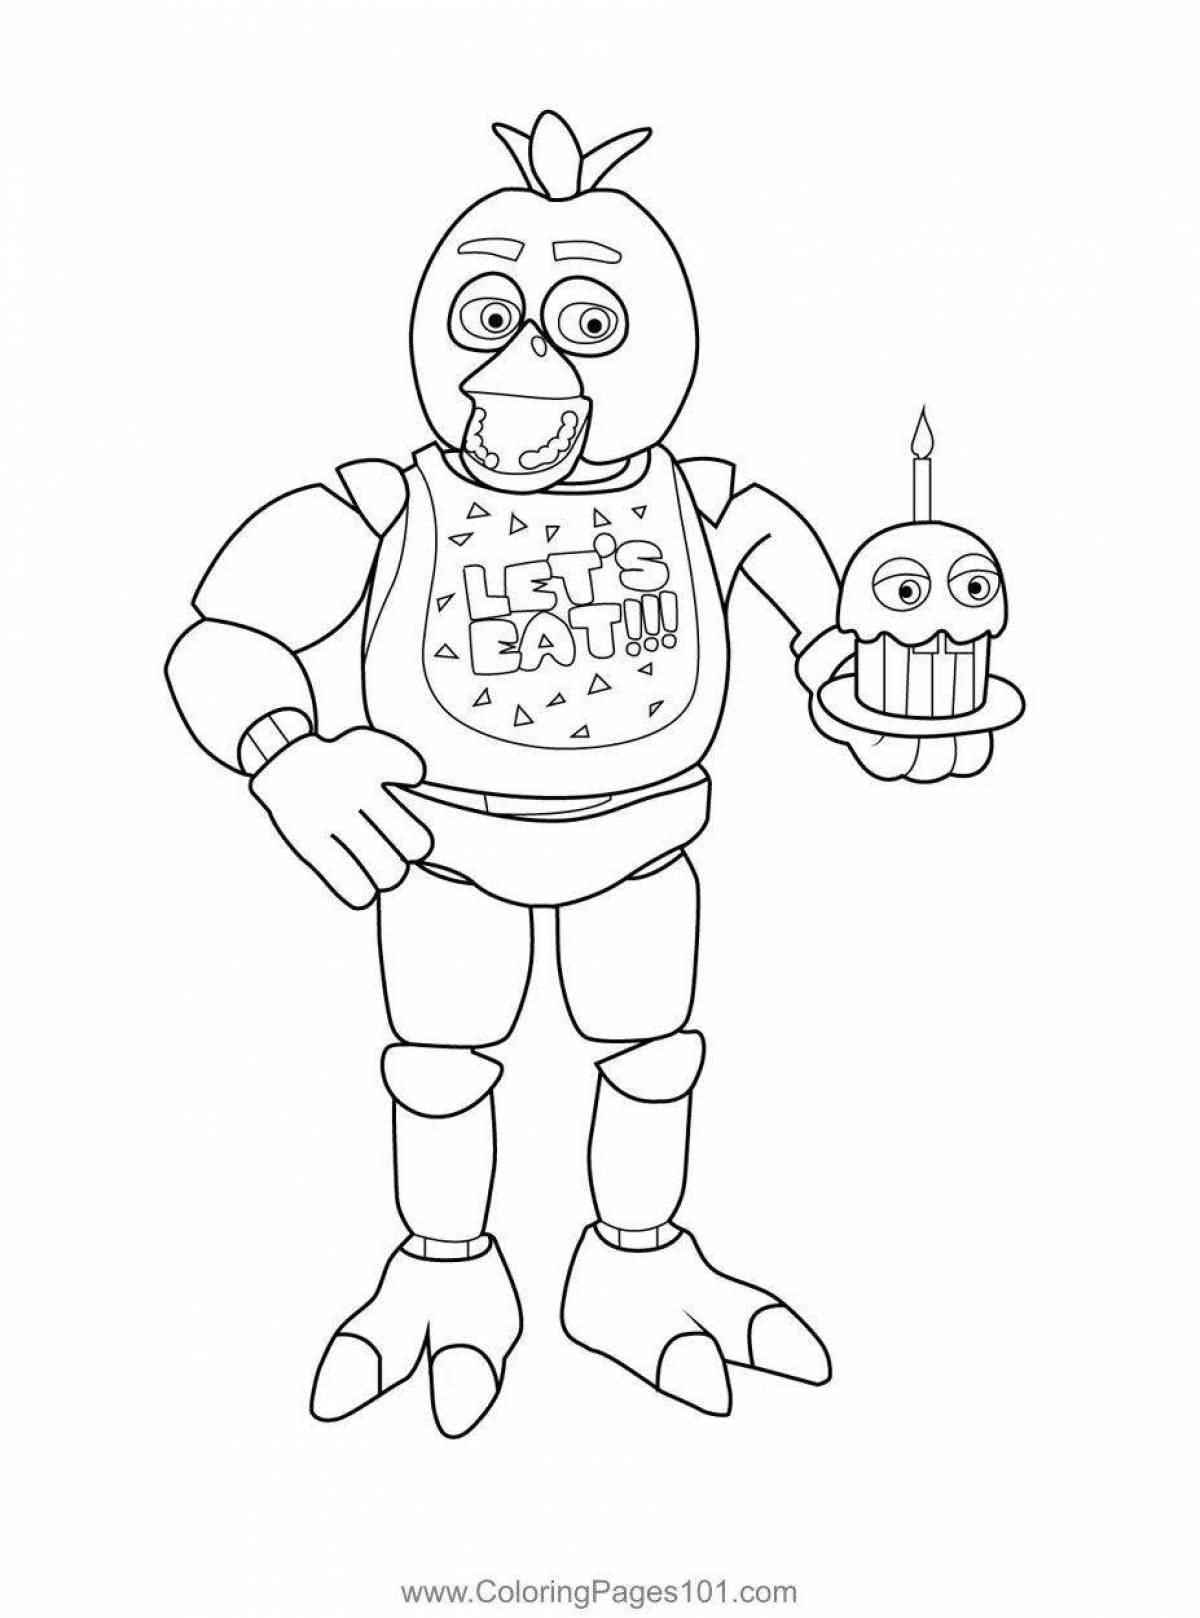 Coloring page of that fnaf chick